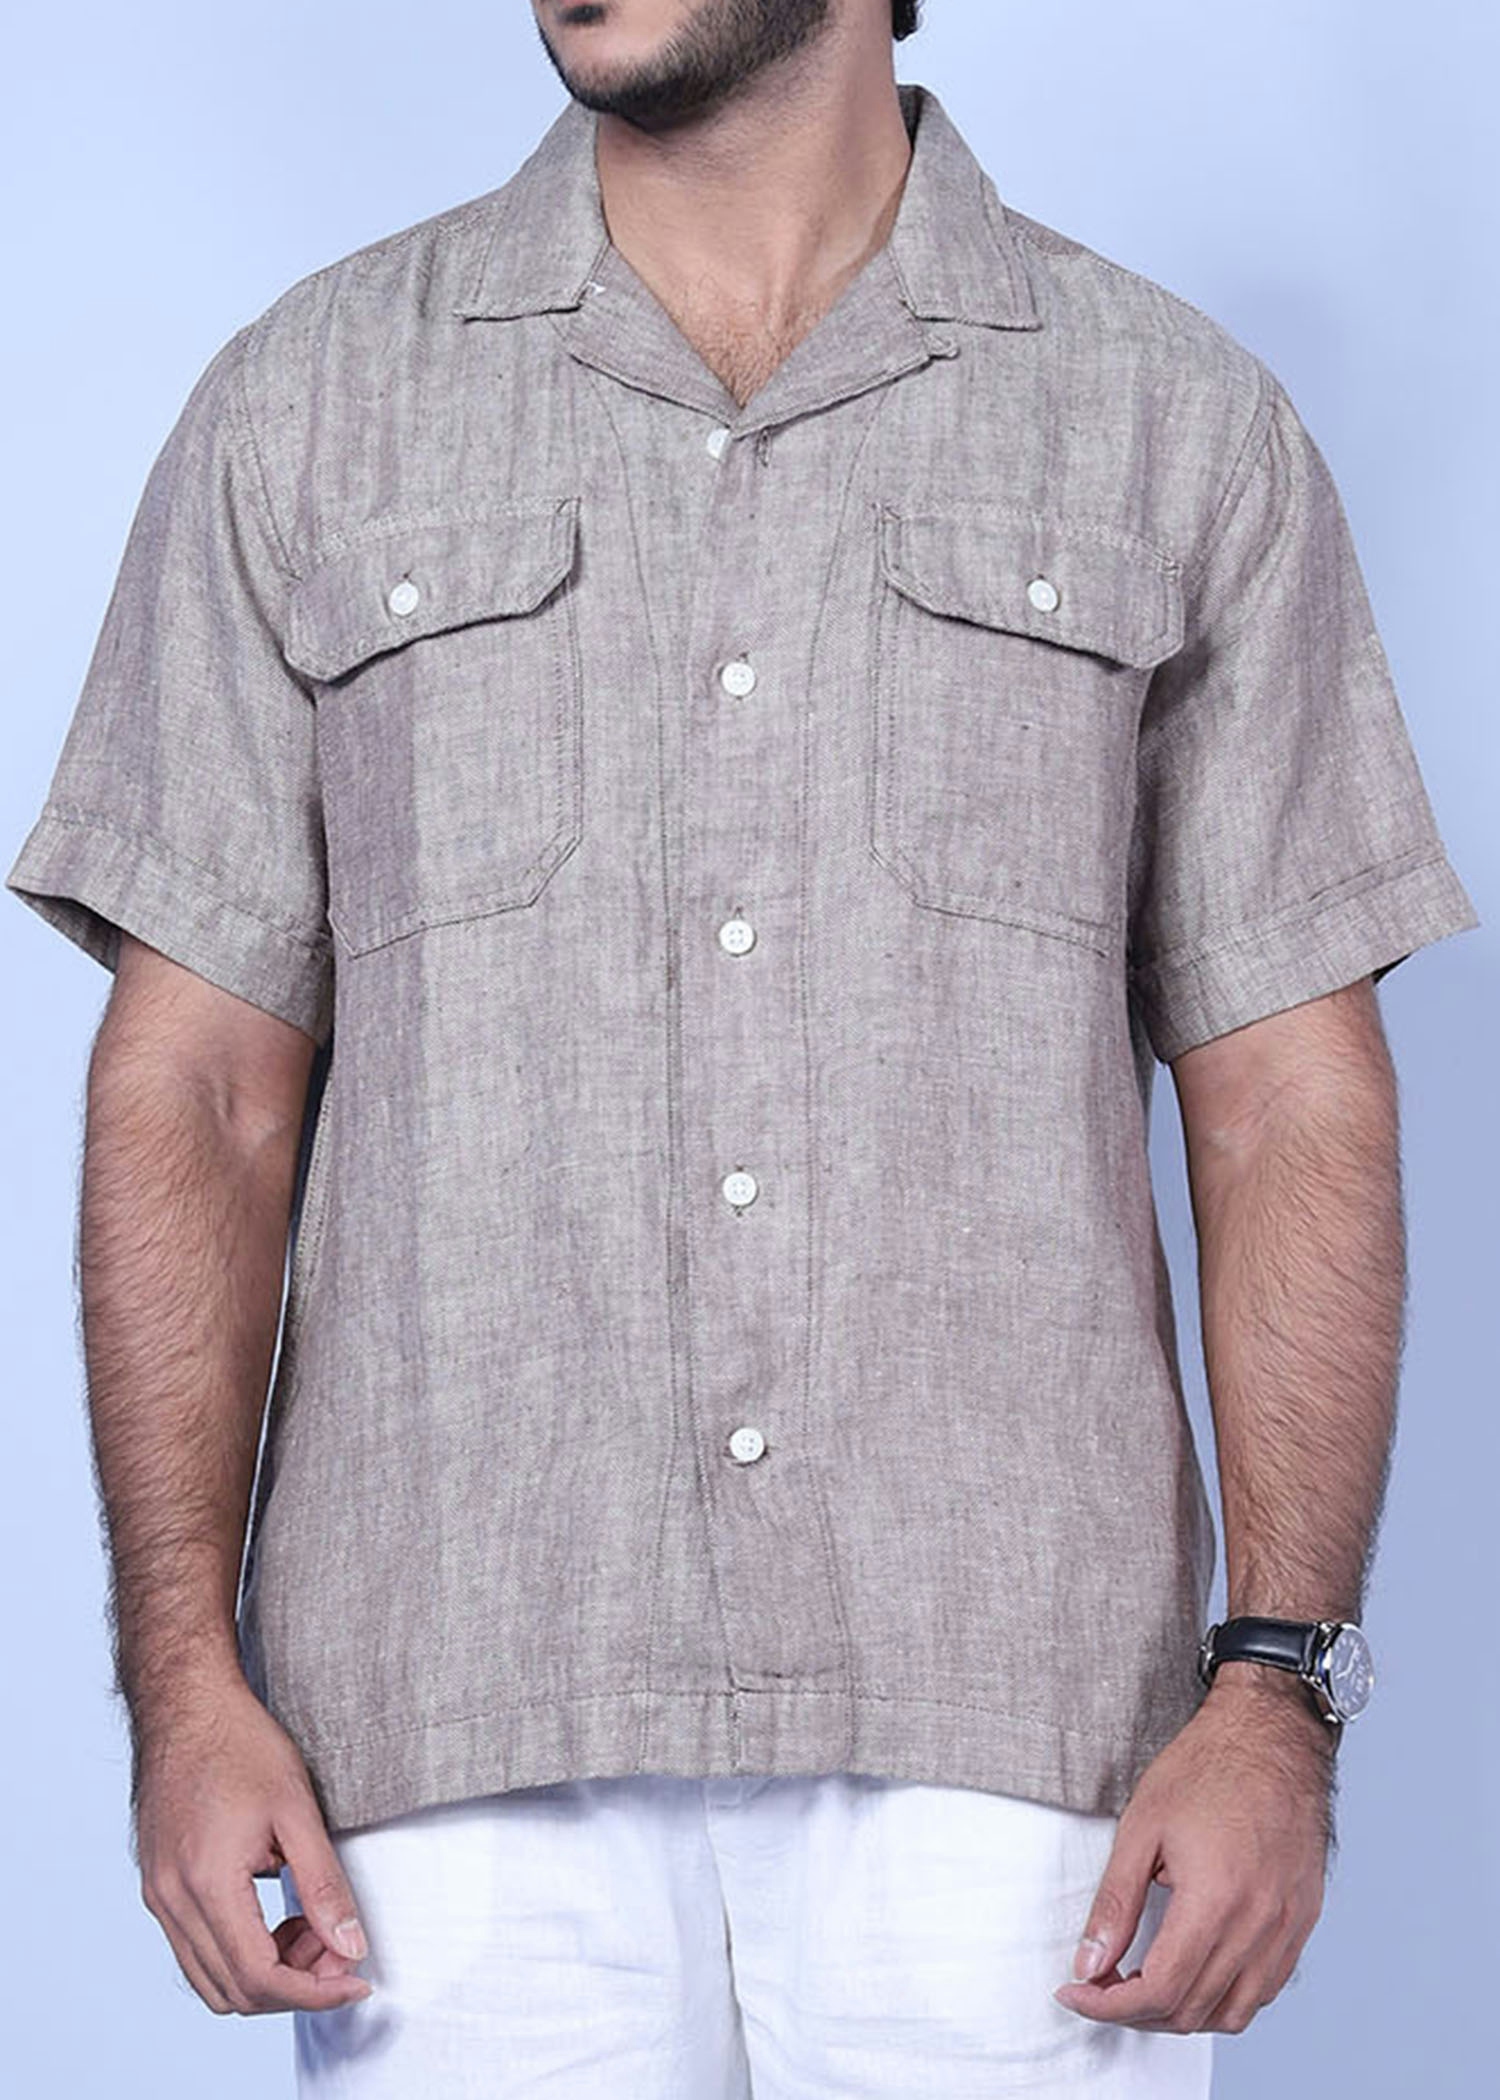 amman hs shirt tobaco color full facecropped